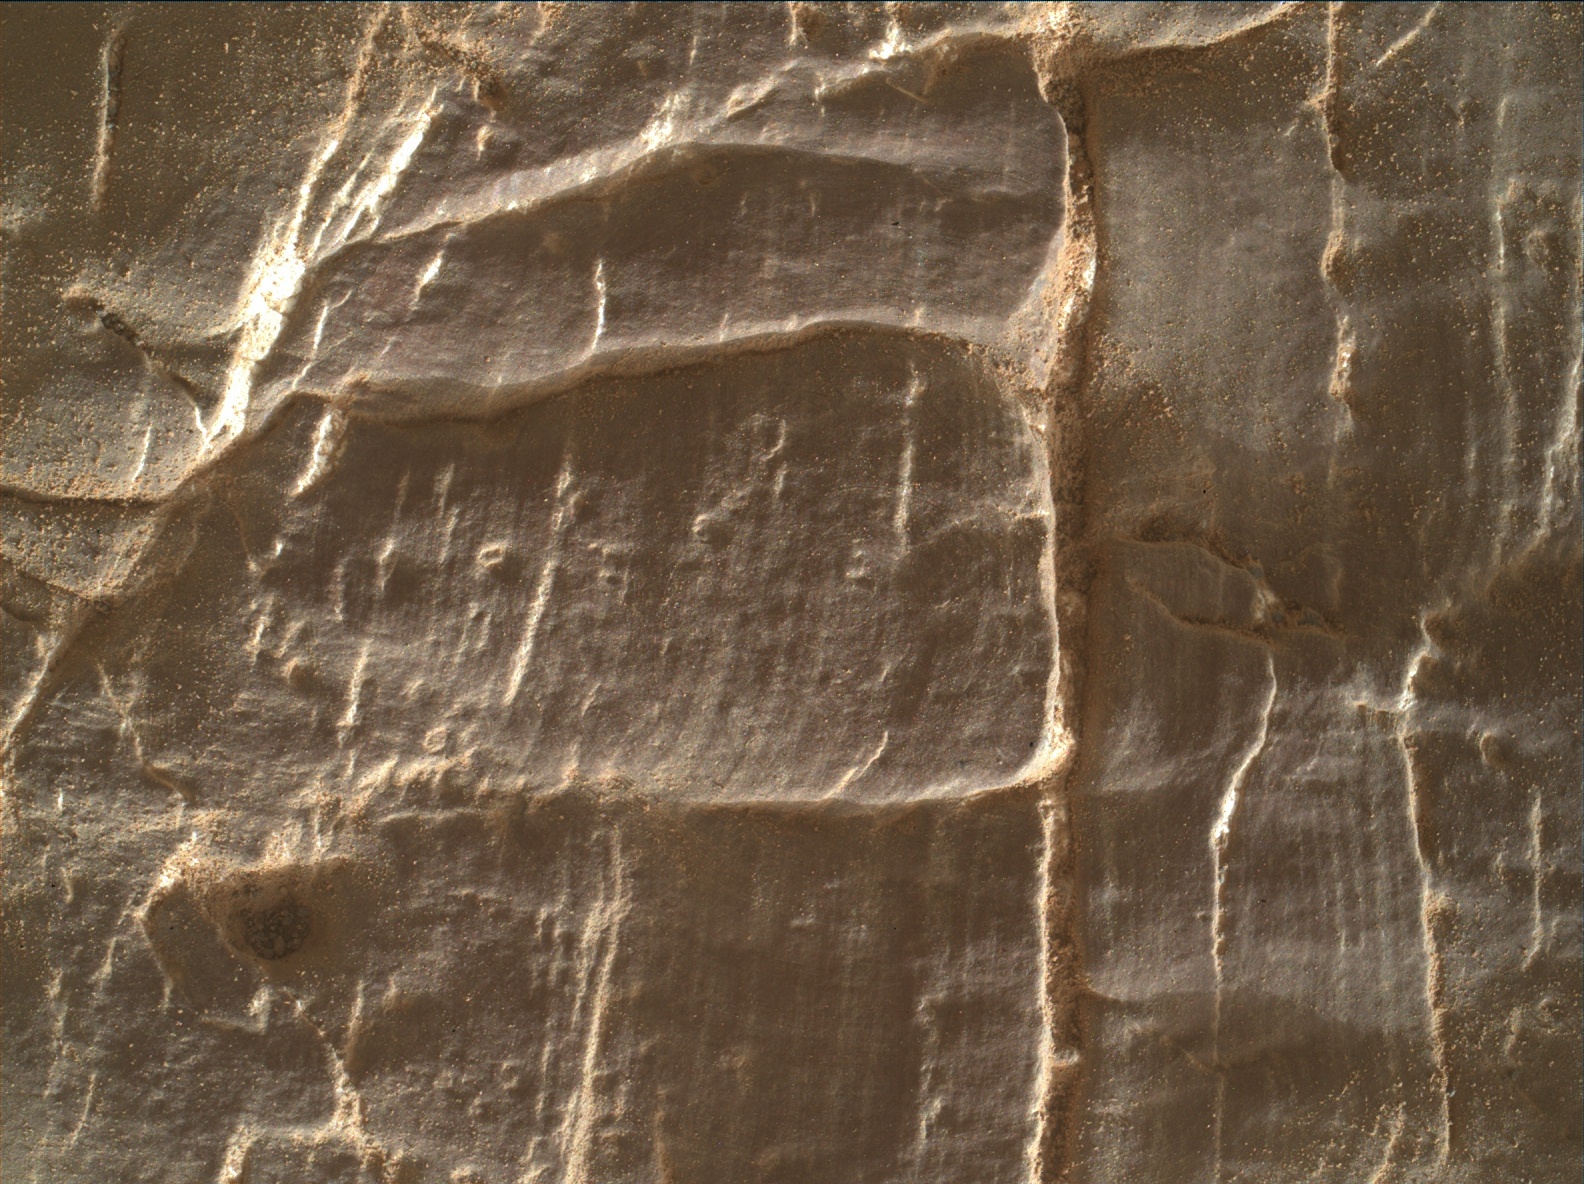 Nasa's Mars rover Curiosity acquired this image using its Mars Hand Lens Imager (MAHLI) on Sol 2473